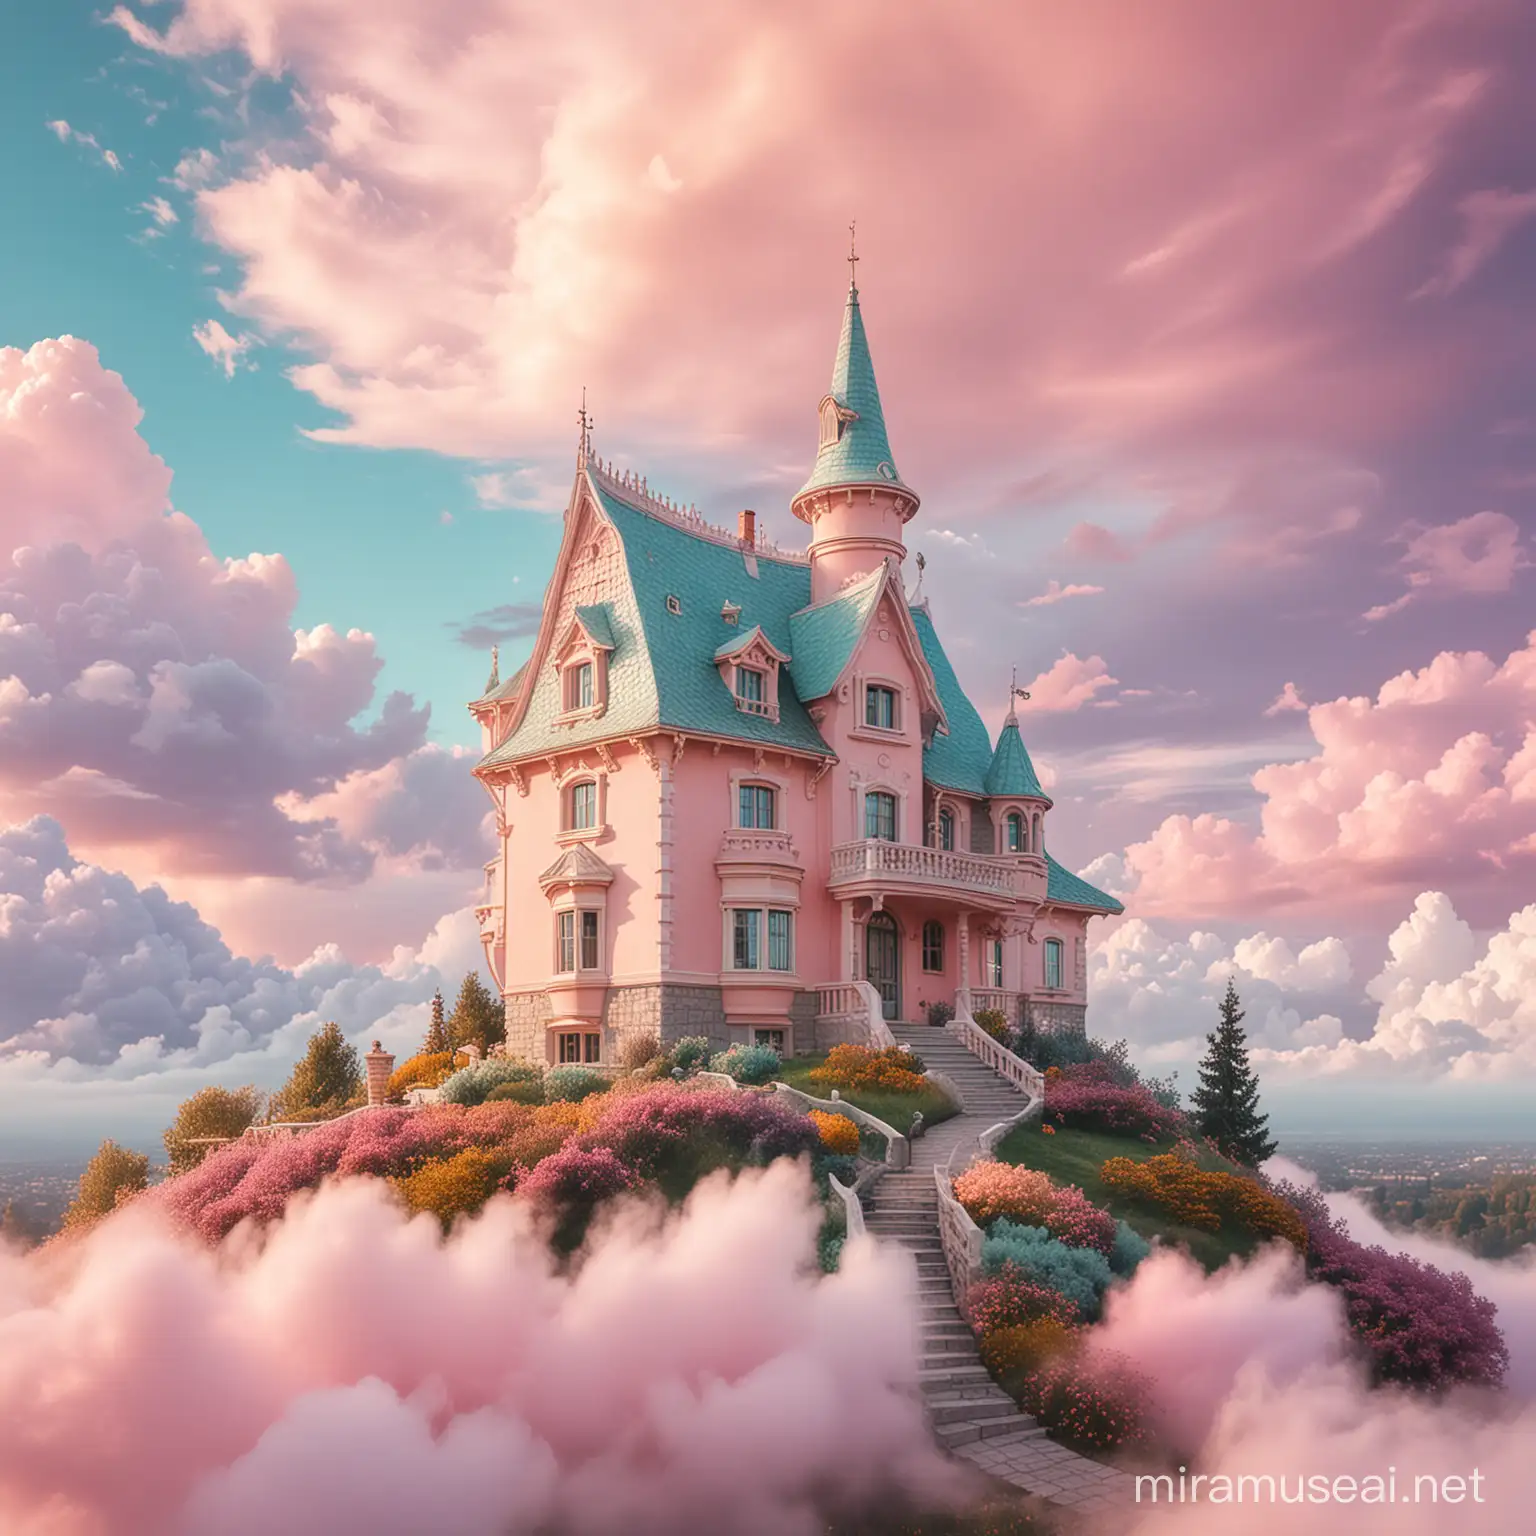 Enchanting Fairytale House in Pastel Clouds